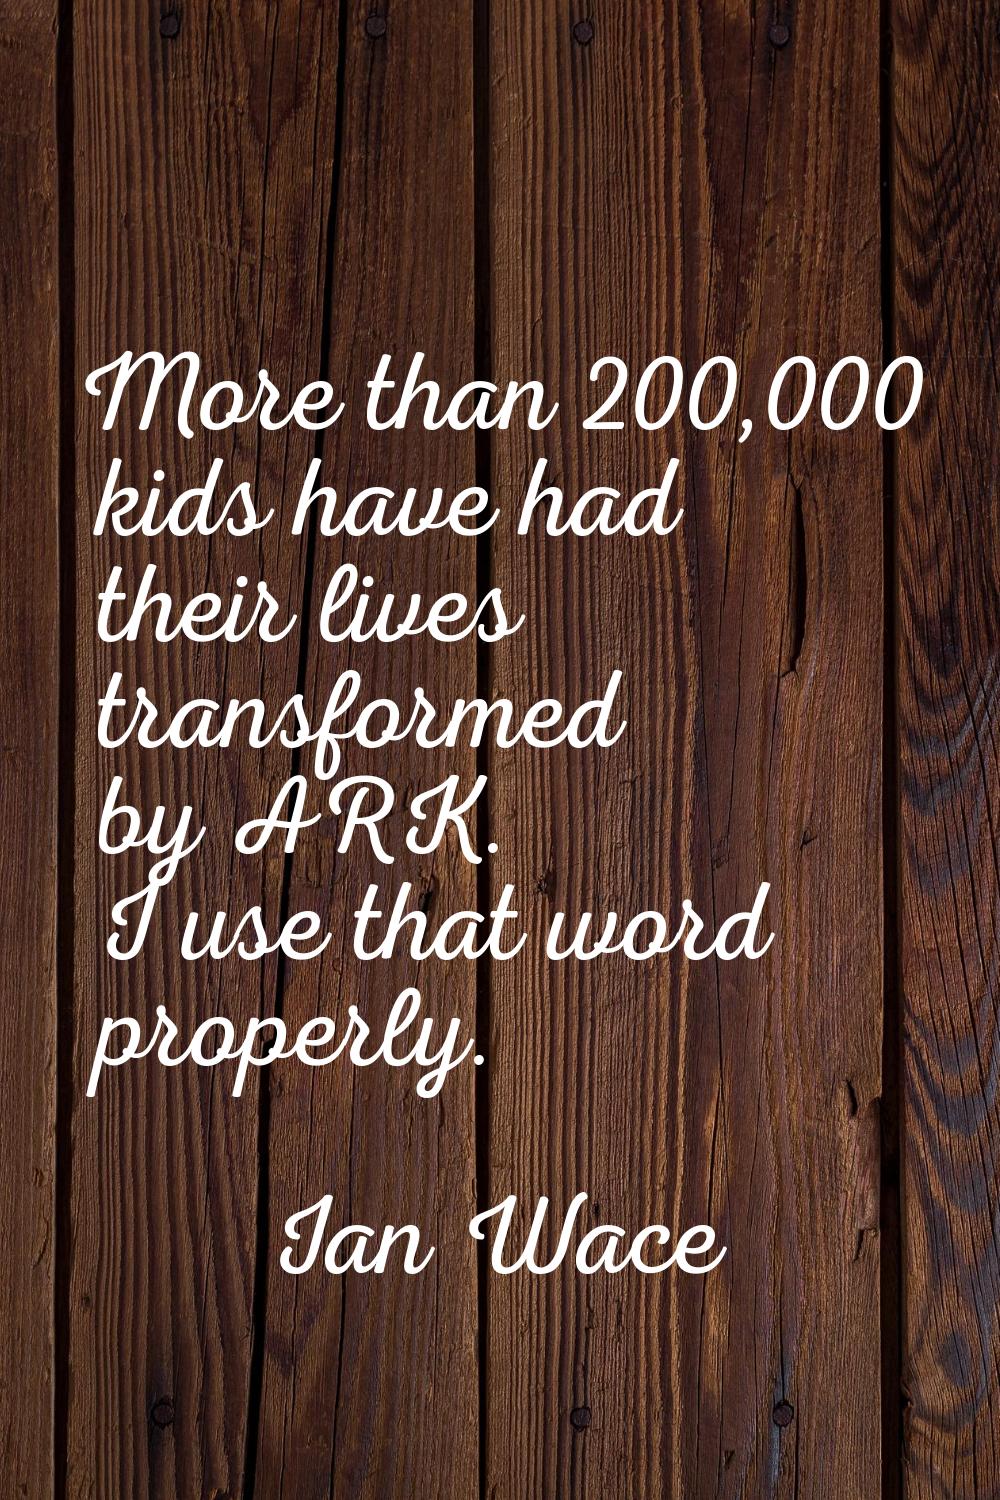 More than 200,000 kids have had their lives transformed by ARK. I use that word properly.